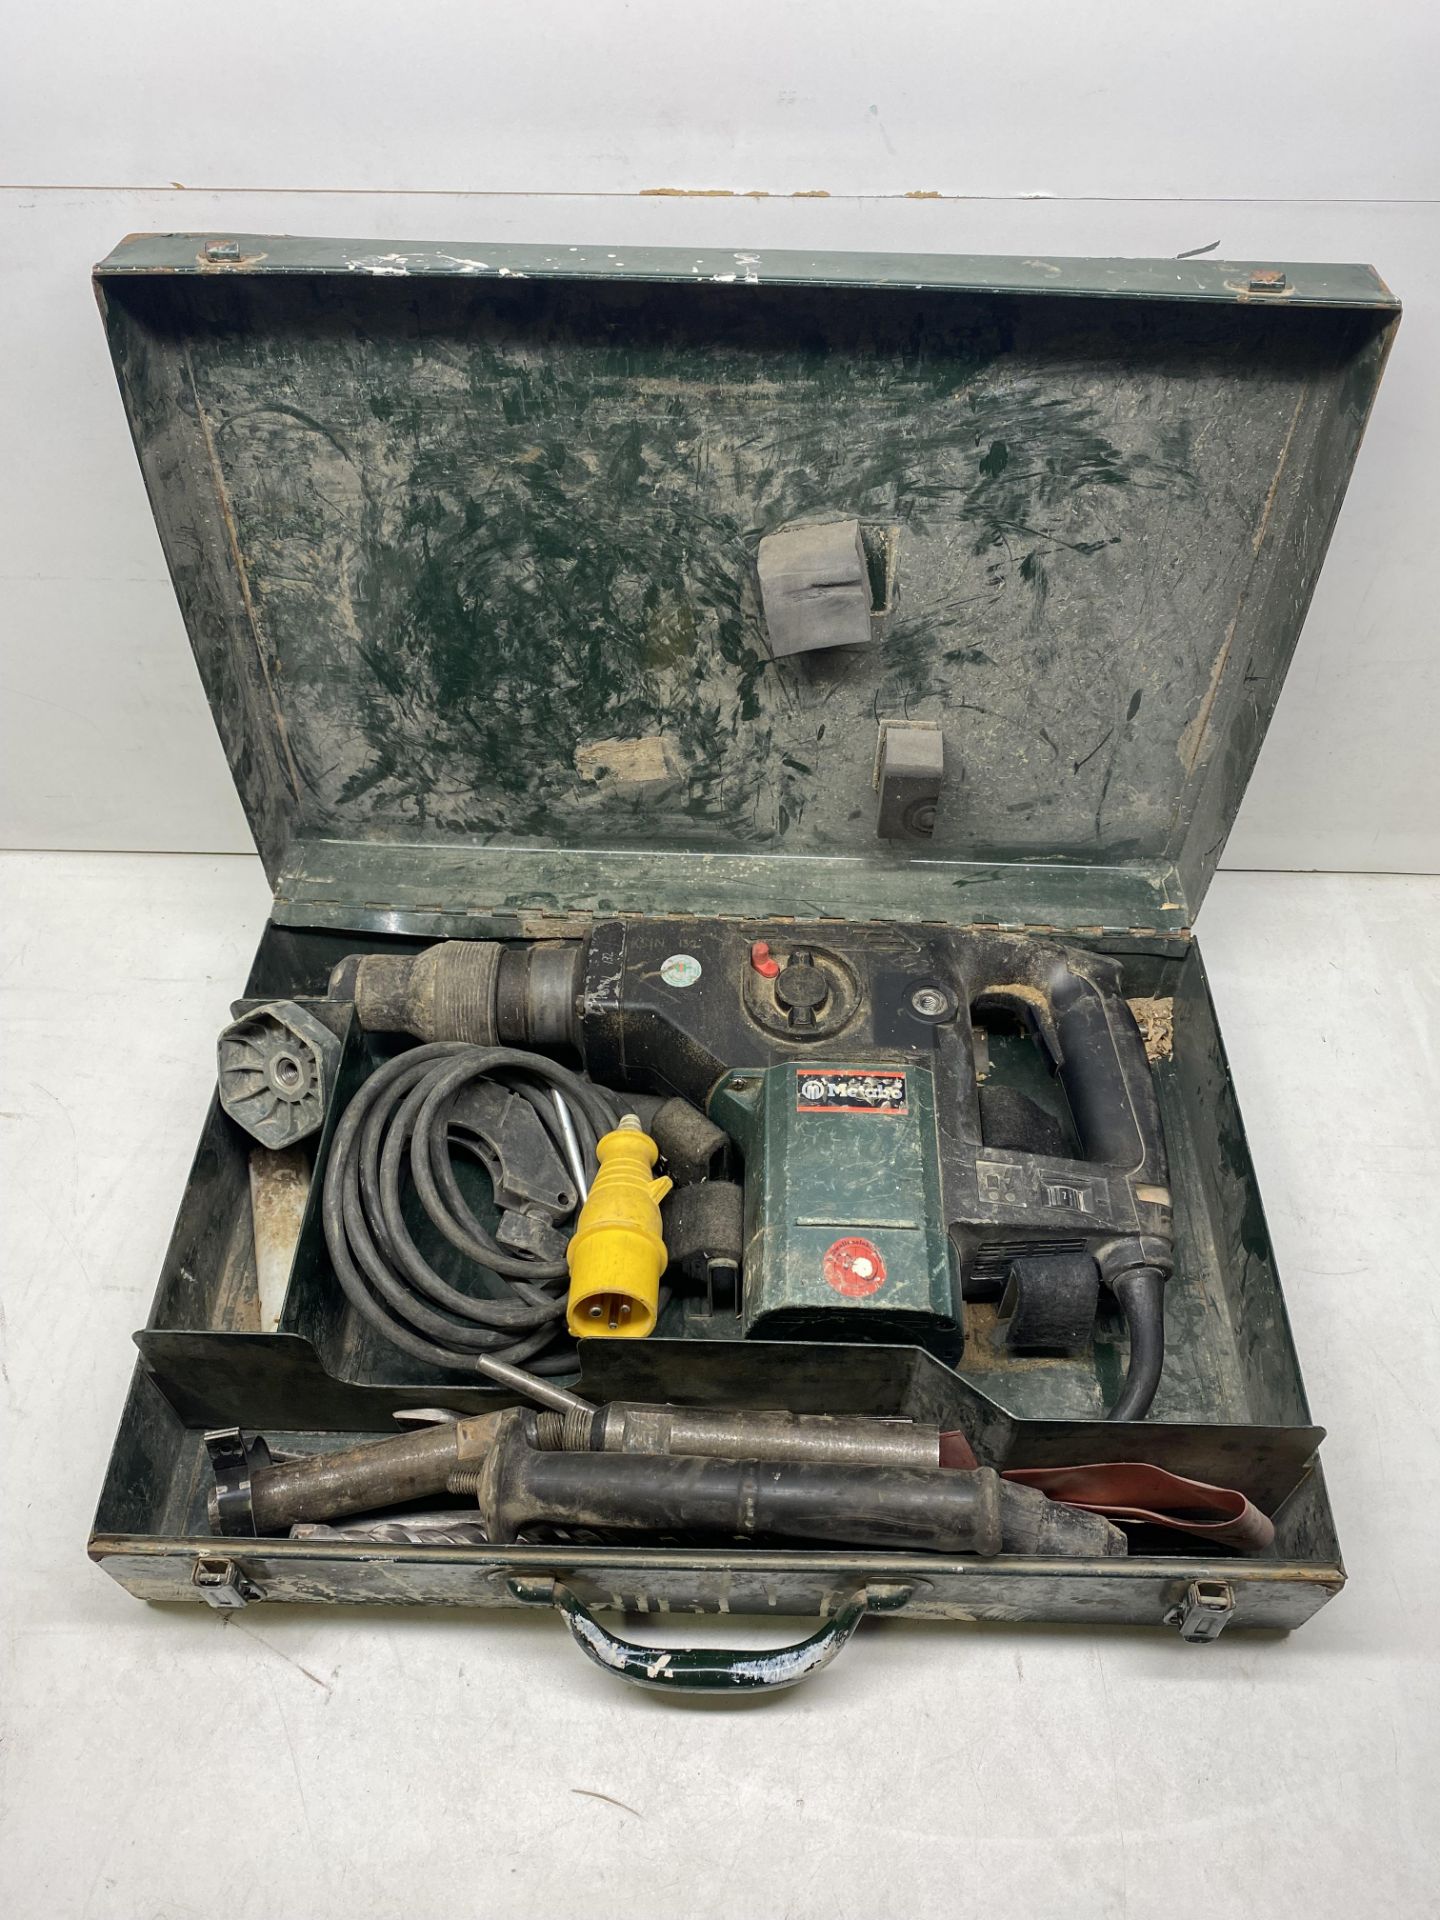 Metabo D-72622 SDS Rotary Hammer Drill